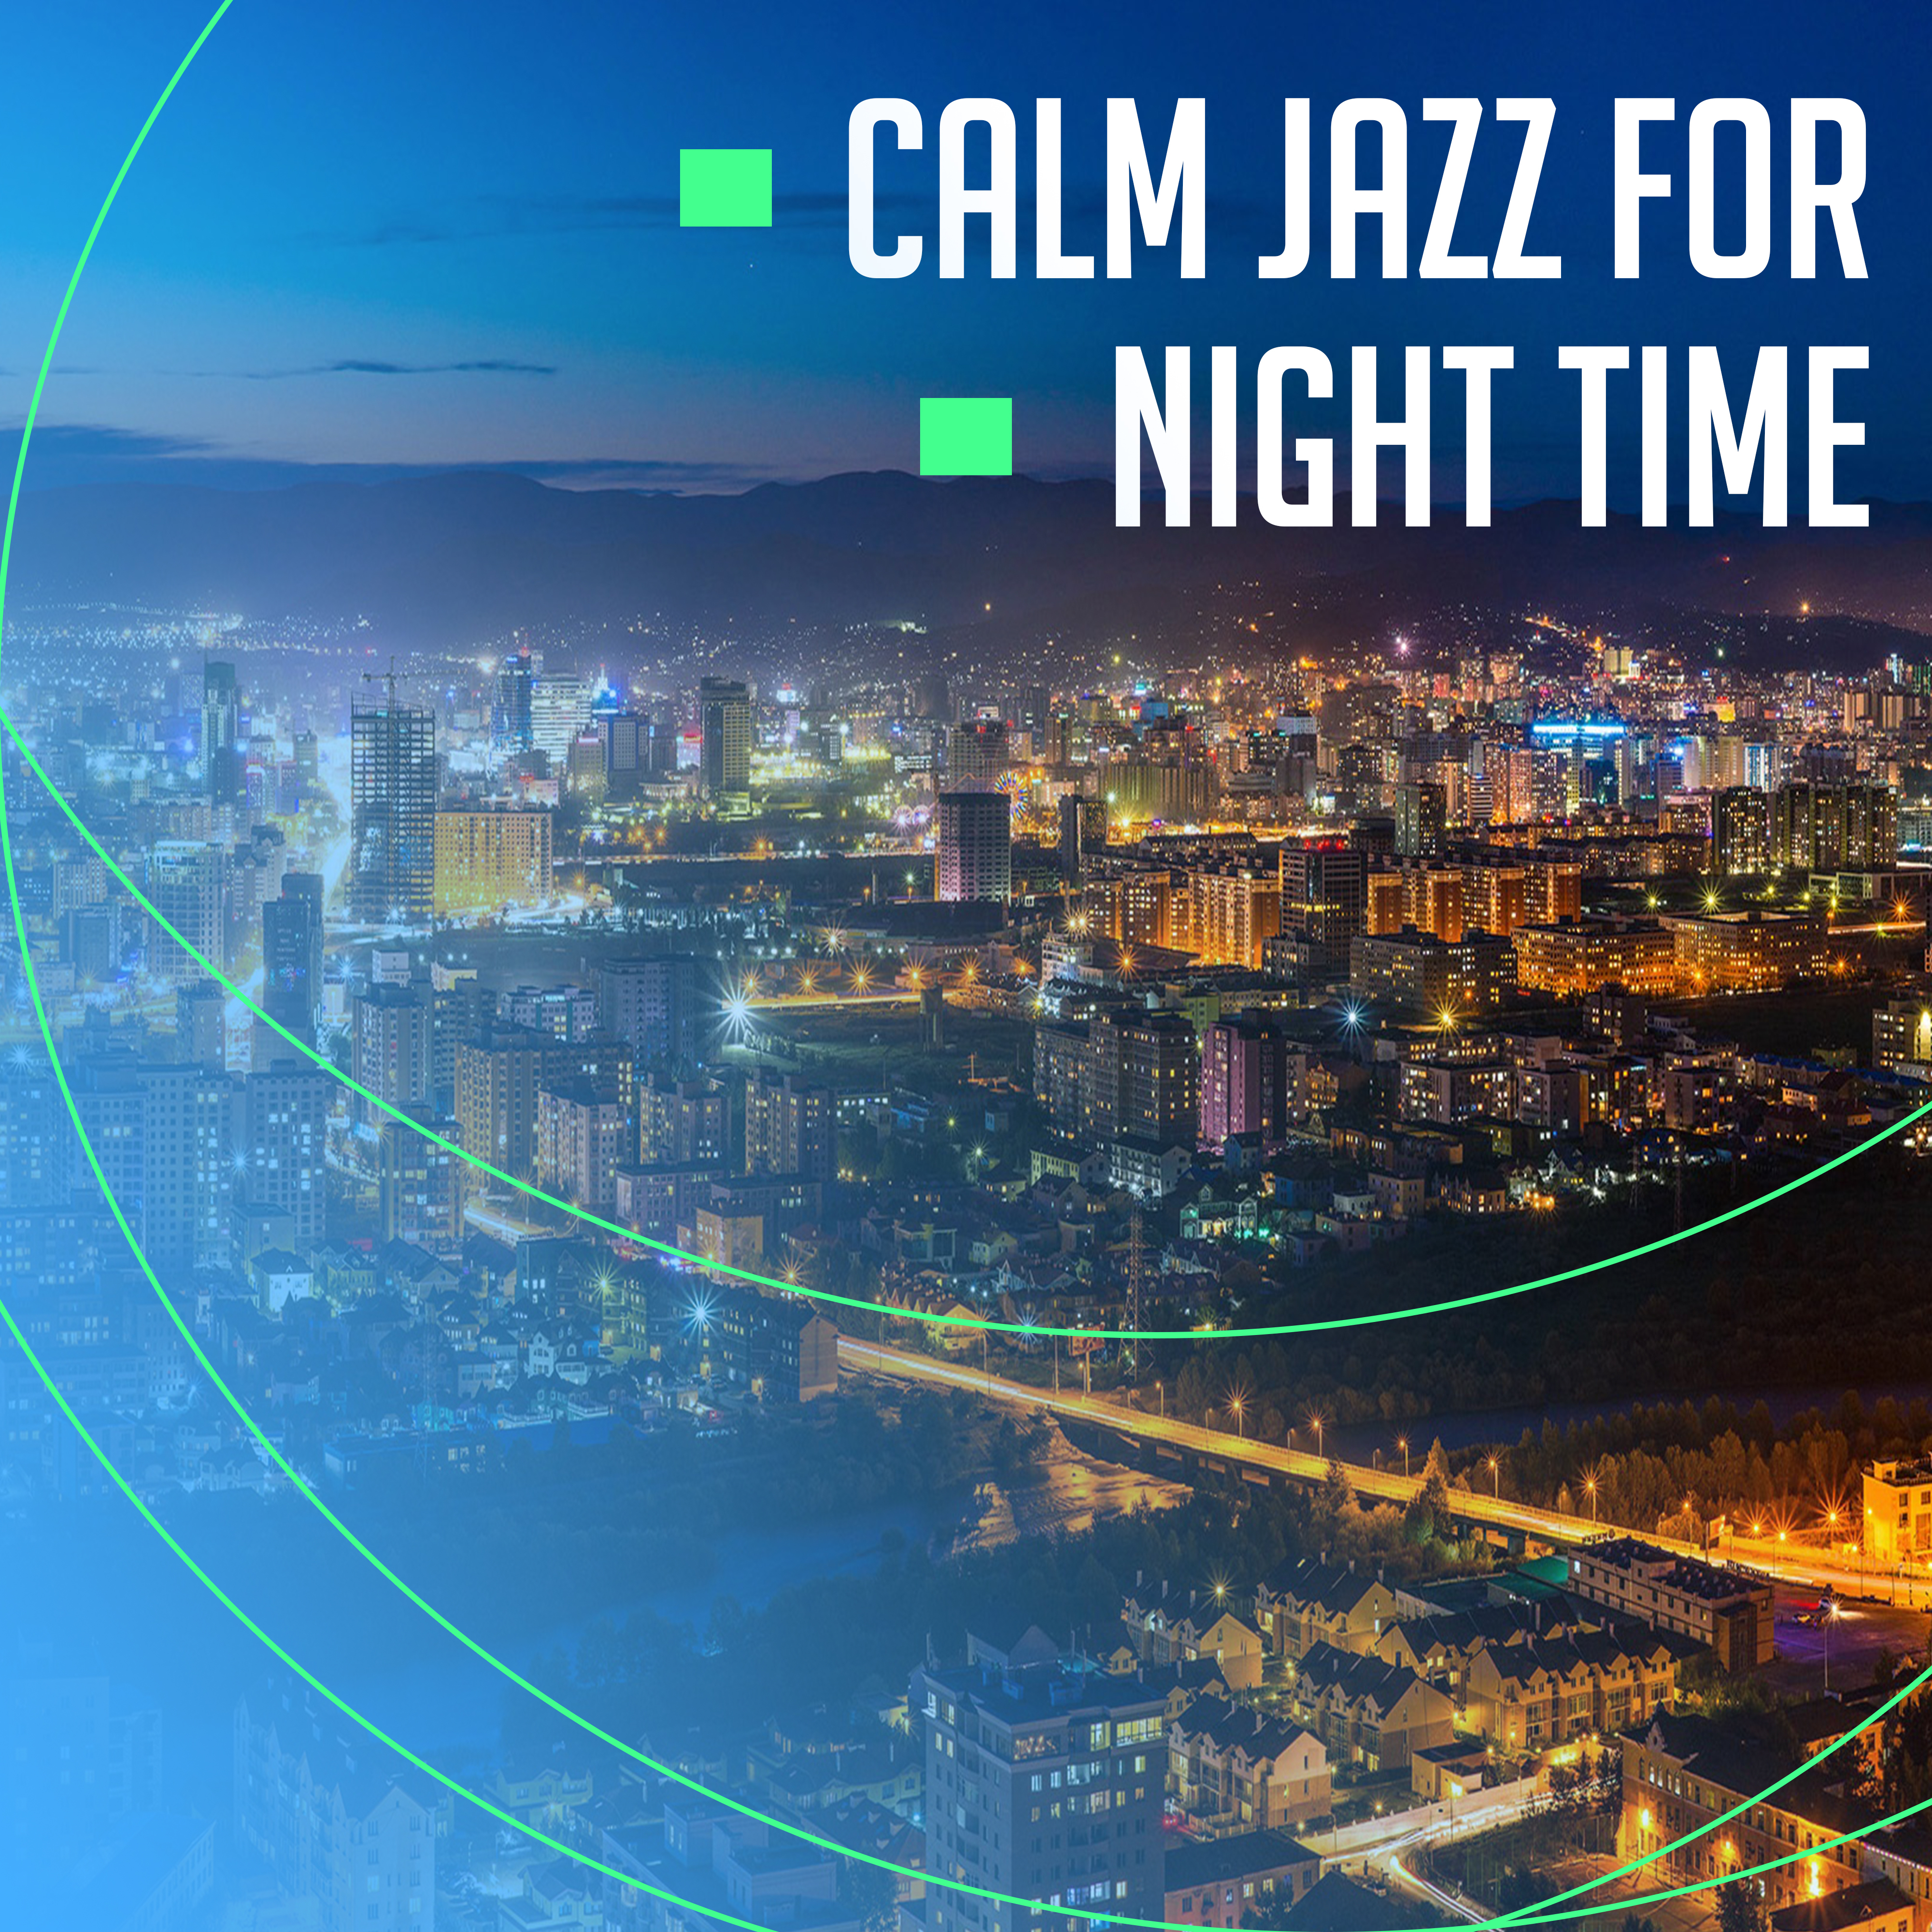 Calm Jazz for Night Time – Relaxing Piano Bar, Night Jazz Club, Smooth Sounds, Evening Lounge